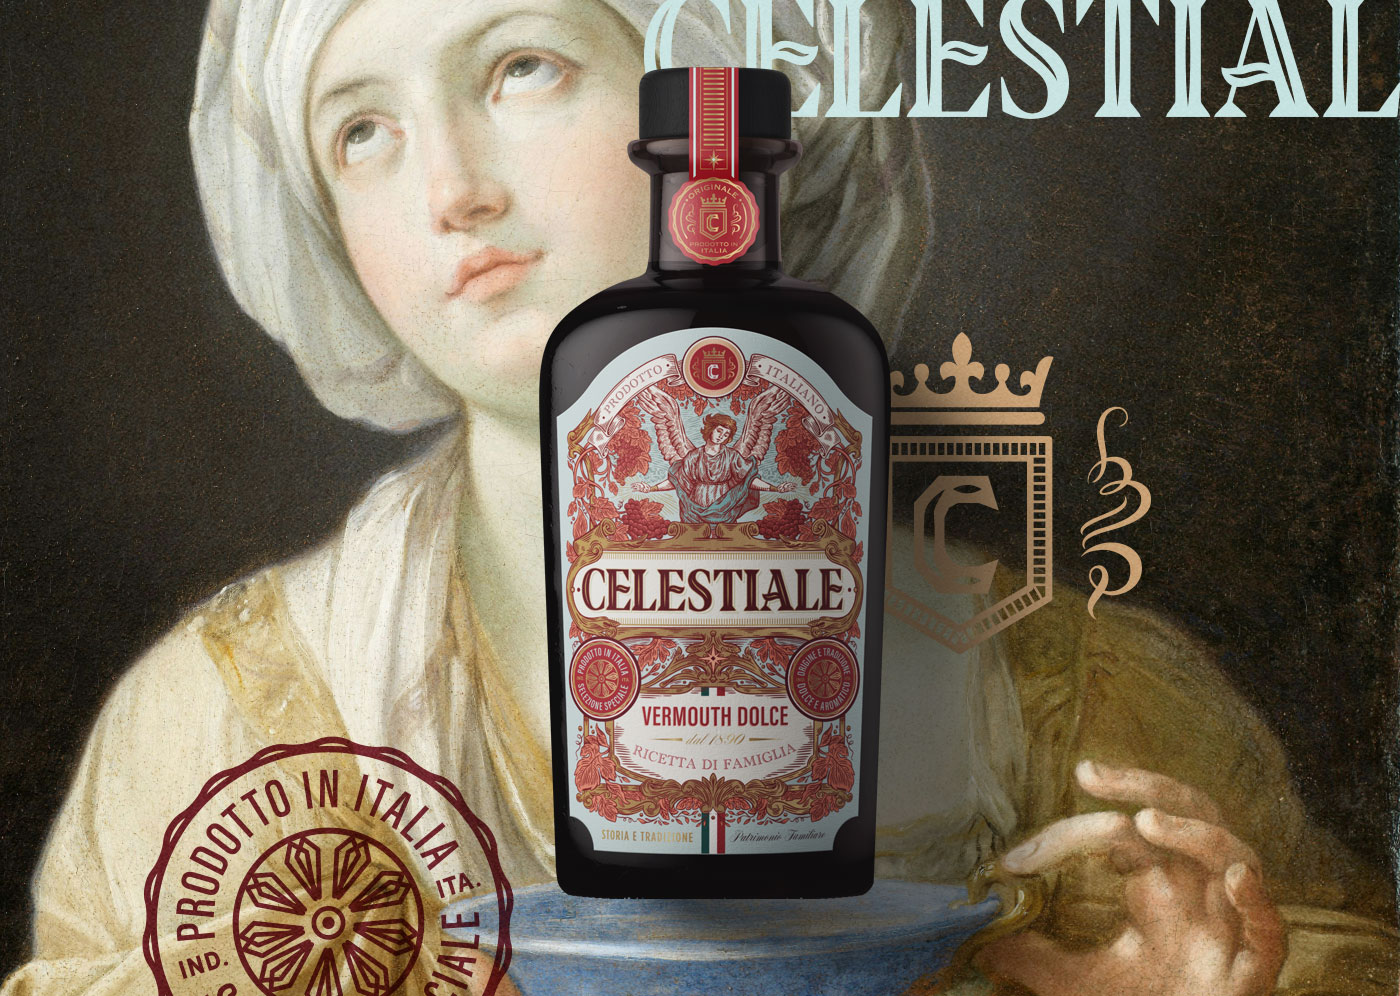 Emi Renzi Studio Create Cælestiale Vermouth Dolce with Design and Illustration of Italian Heritage